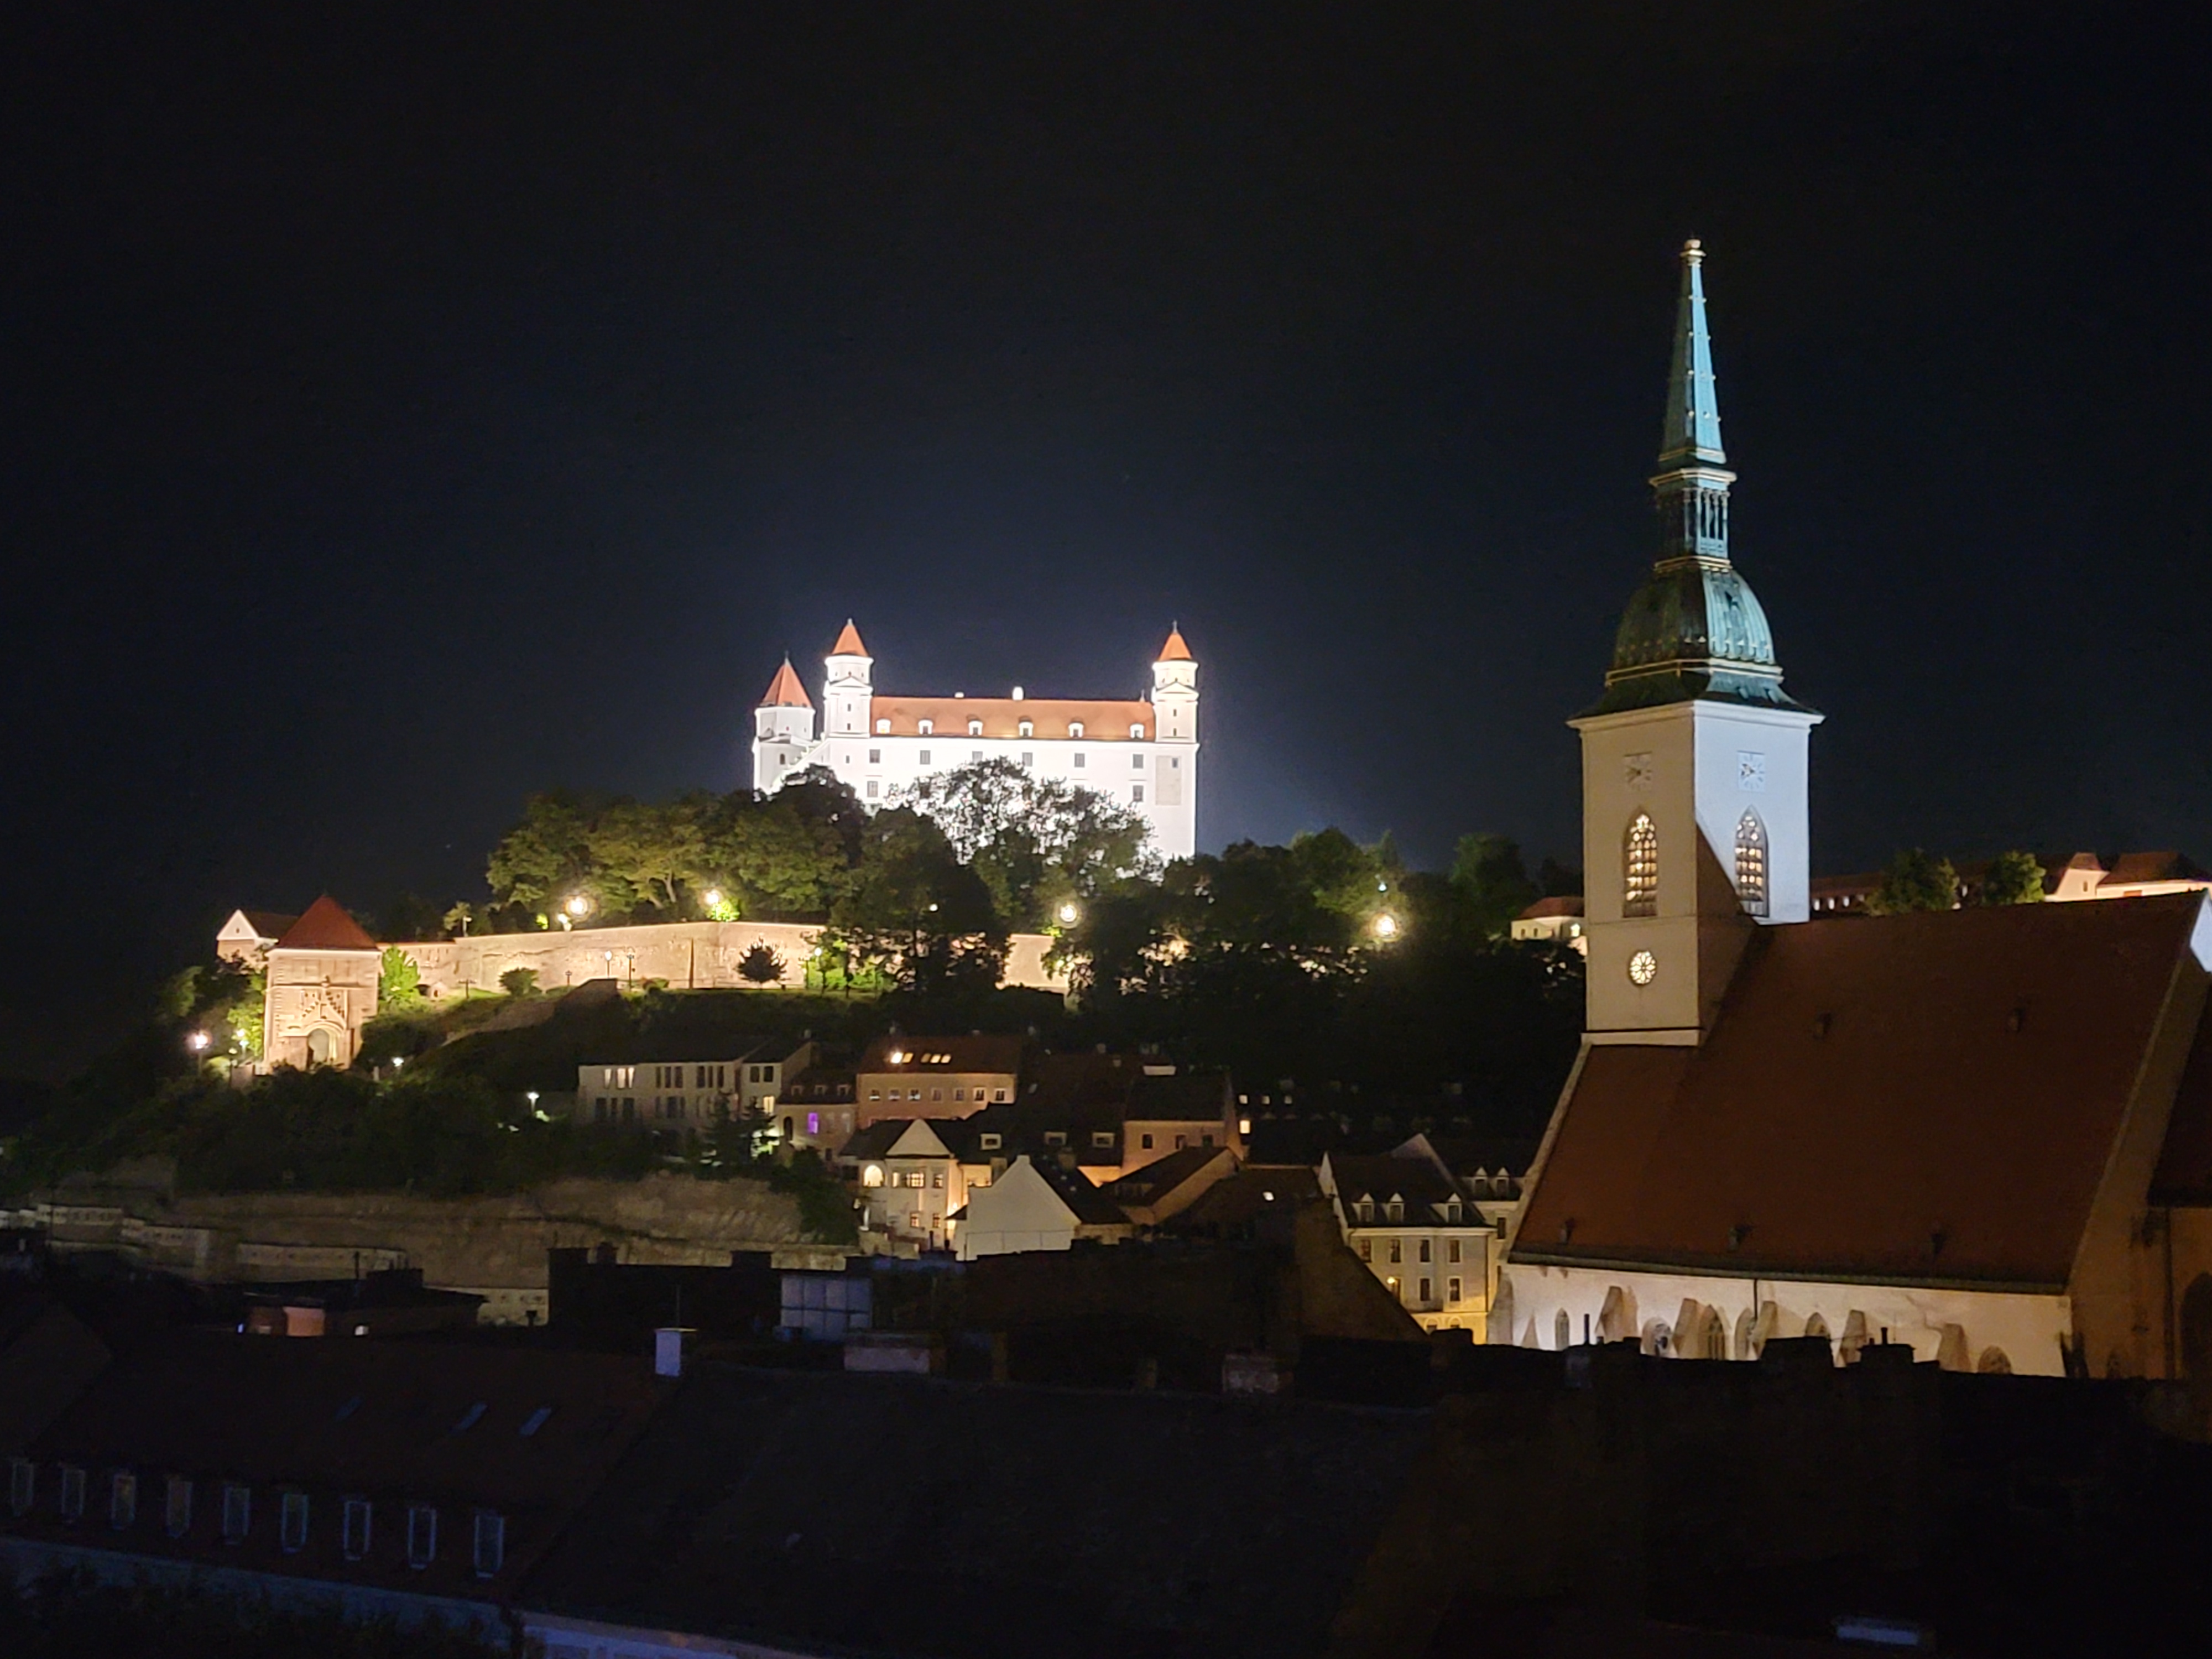 The beautiful European city of Bratislava, Slovakia, with its graceful castle, hosted Starmus VII, a short distance away from the metropolis of Vienna, Austria. Credit: David J. Eicher.